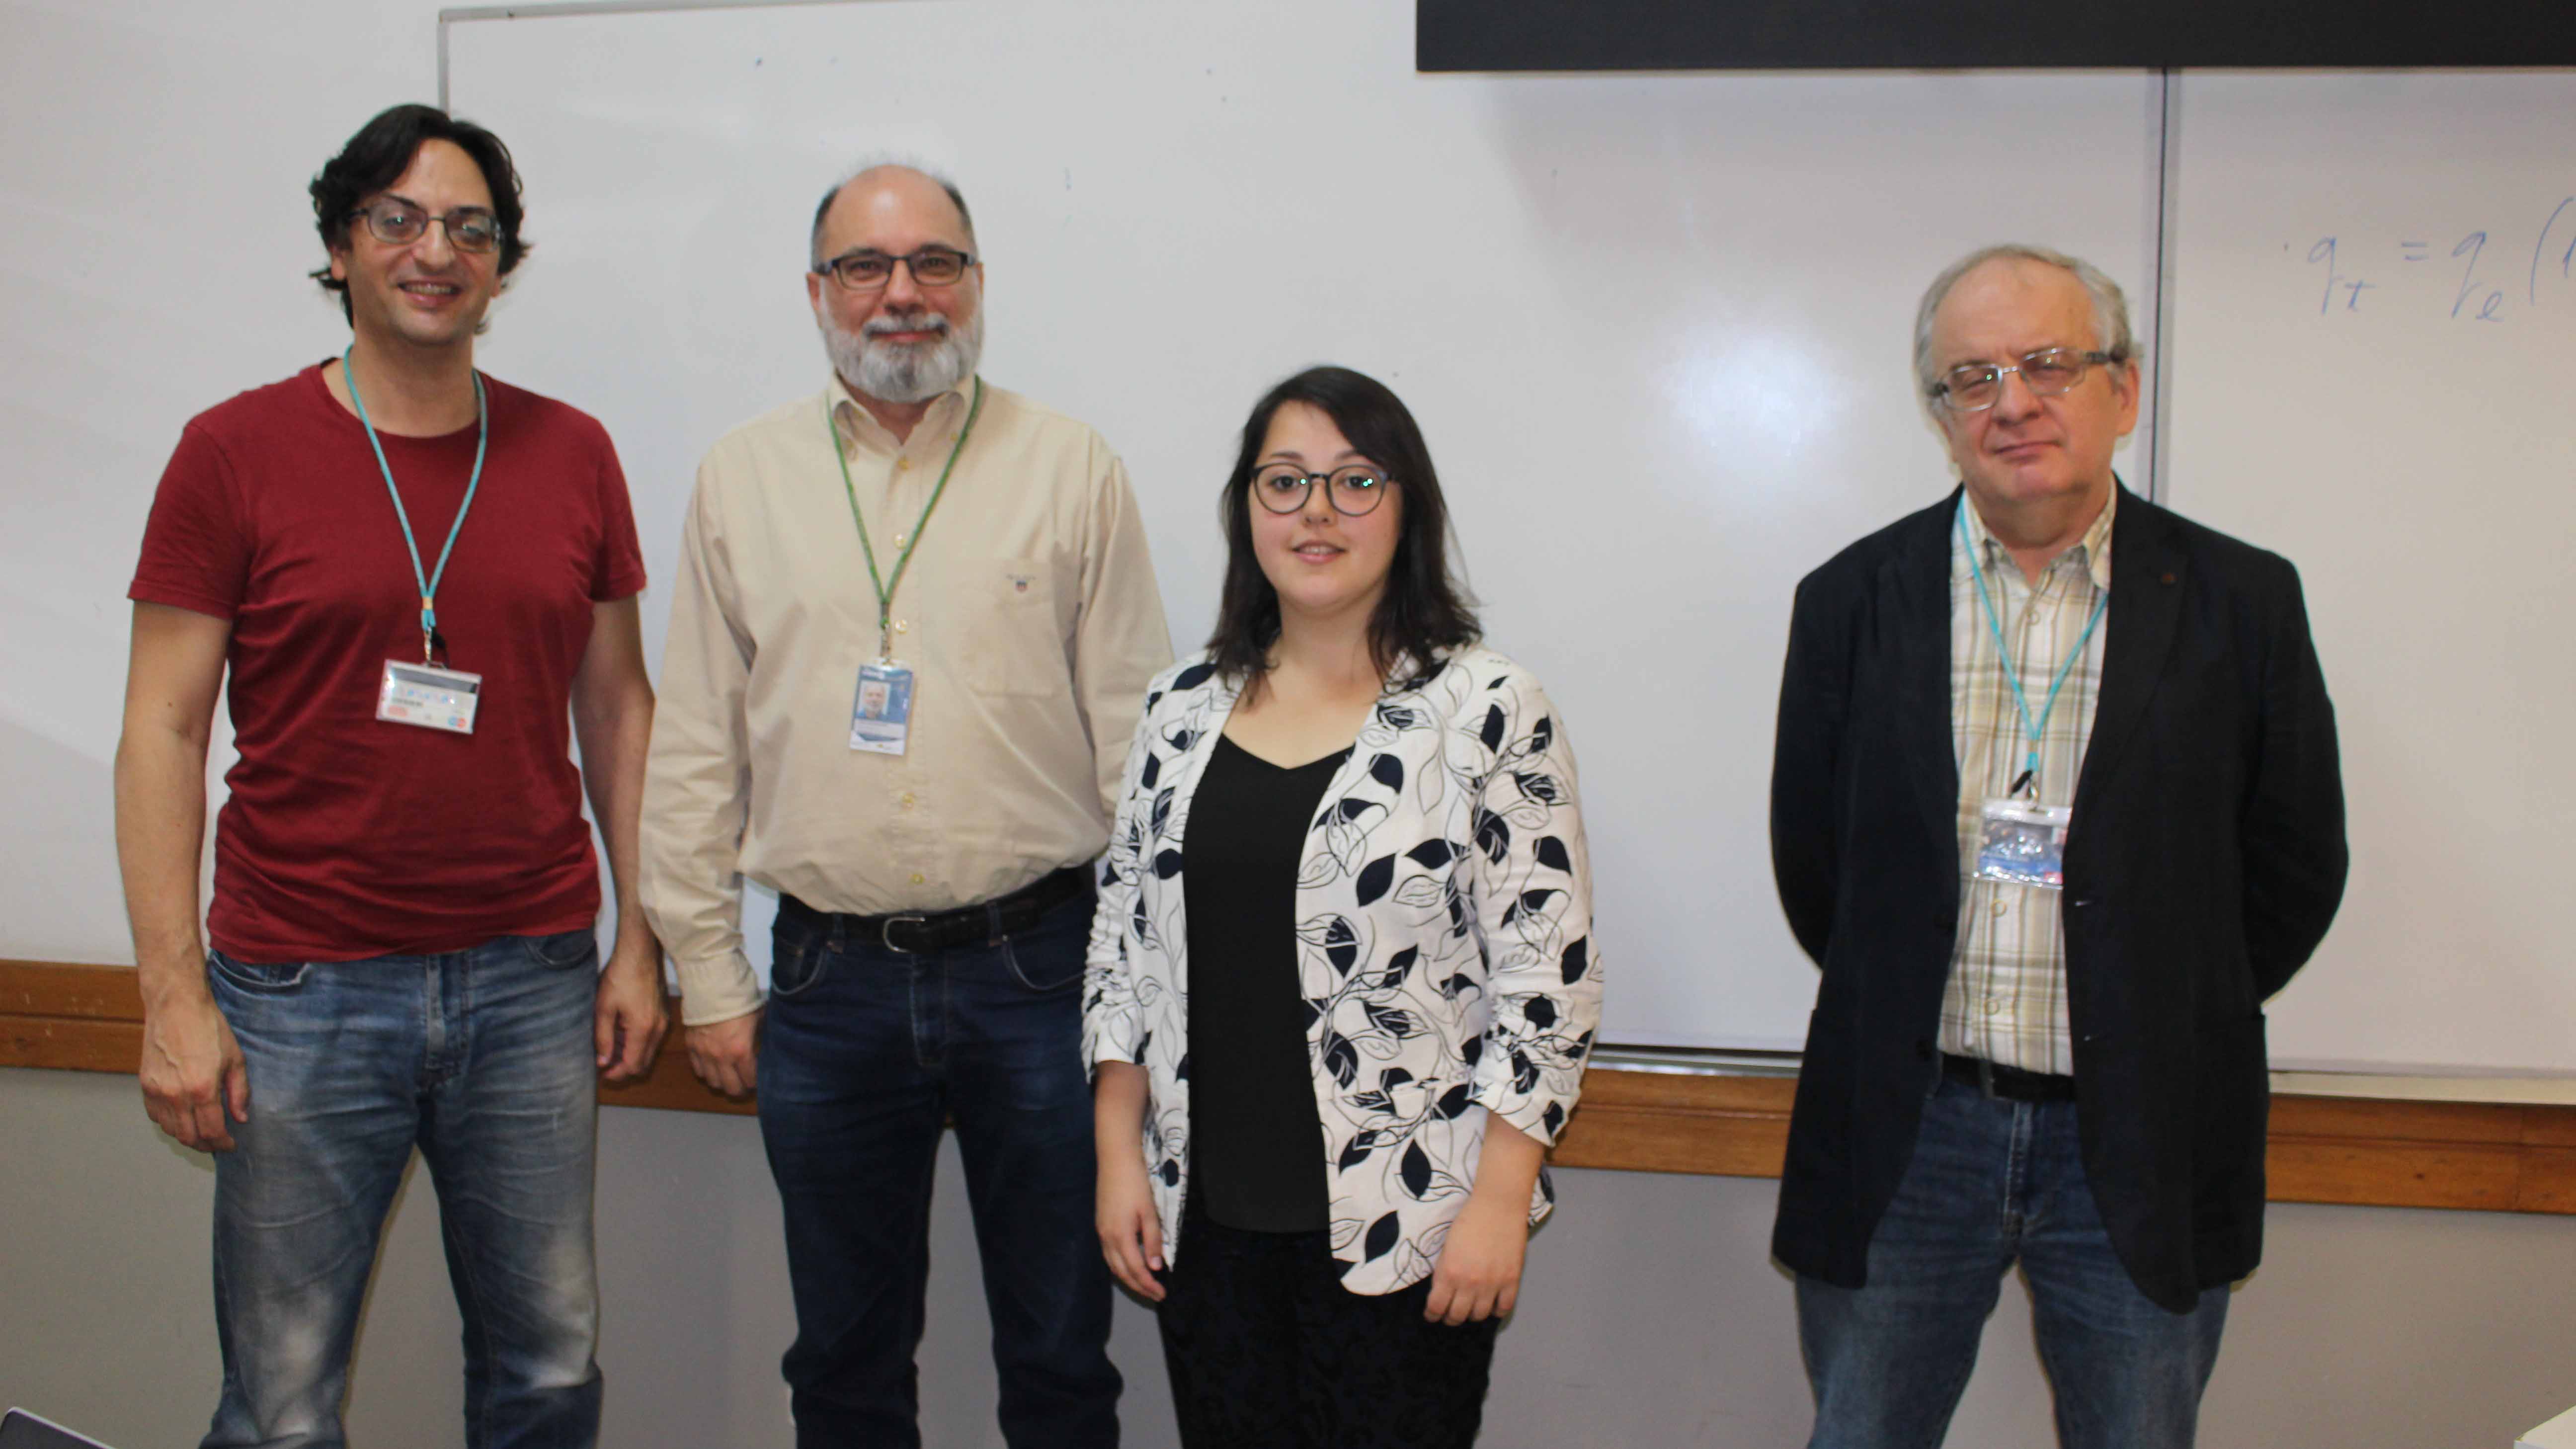 Master Sabriie Vatansever and the evaluation panel for her dissertation. From left to right: Professor Pedro Pires, Professor João Rodrigues, Master Sabriie Vatansever and Professor José Mesquita.